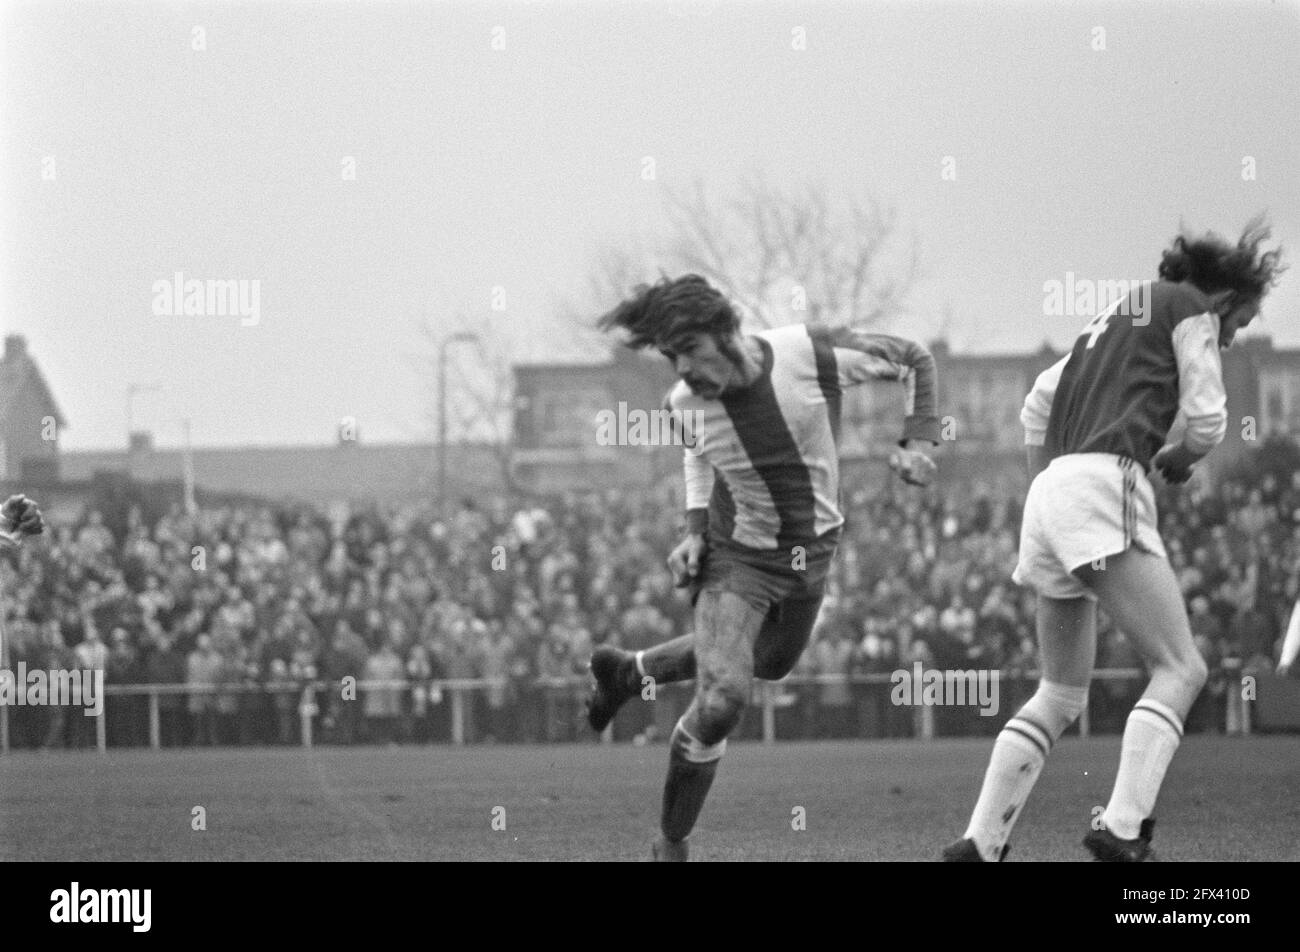 Elinkwijk against VVV 2-0, KNVB cup, Van der Bosch (left) is going to score  1-0, December 10, 1972, sports, soccer, The Netherlands, 20th century press  agency photo, news to remember, documentary, historic